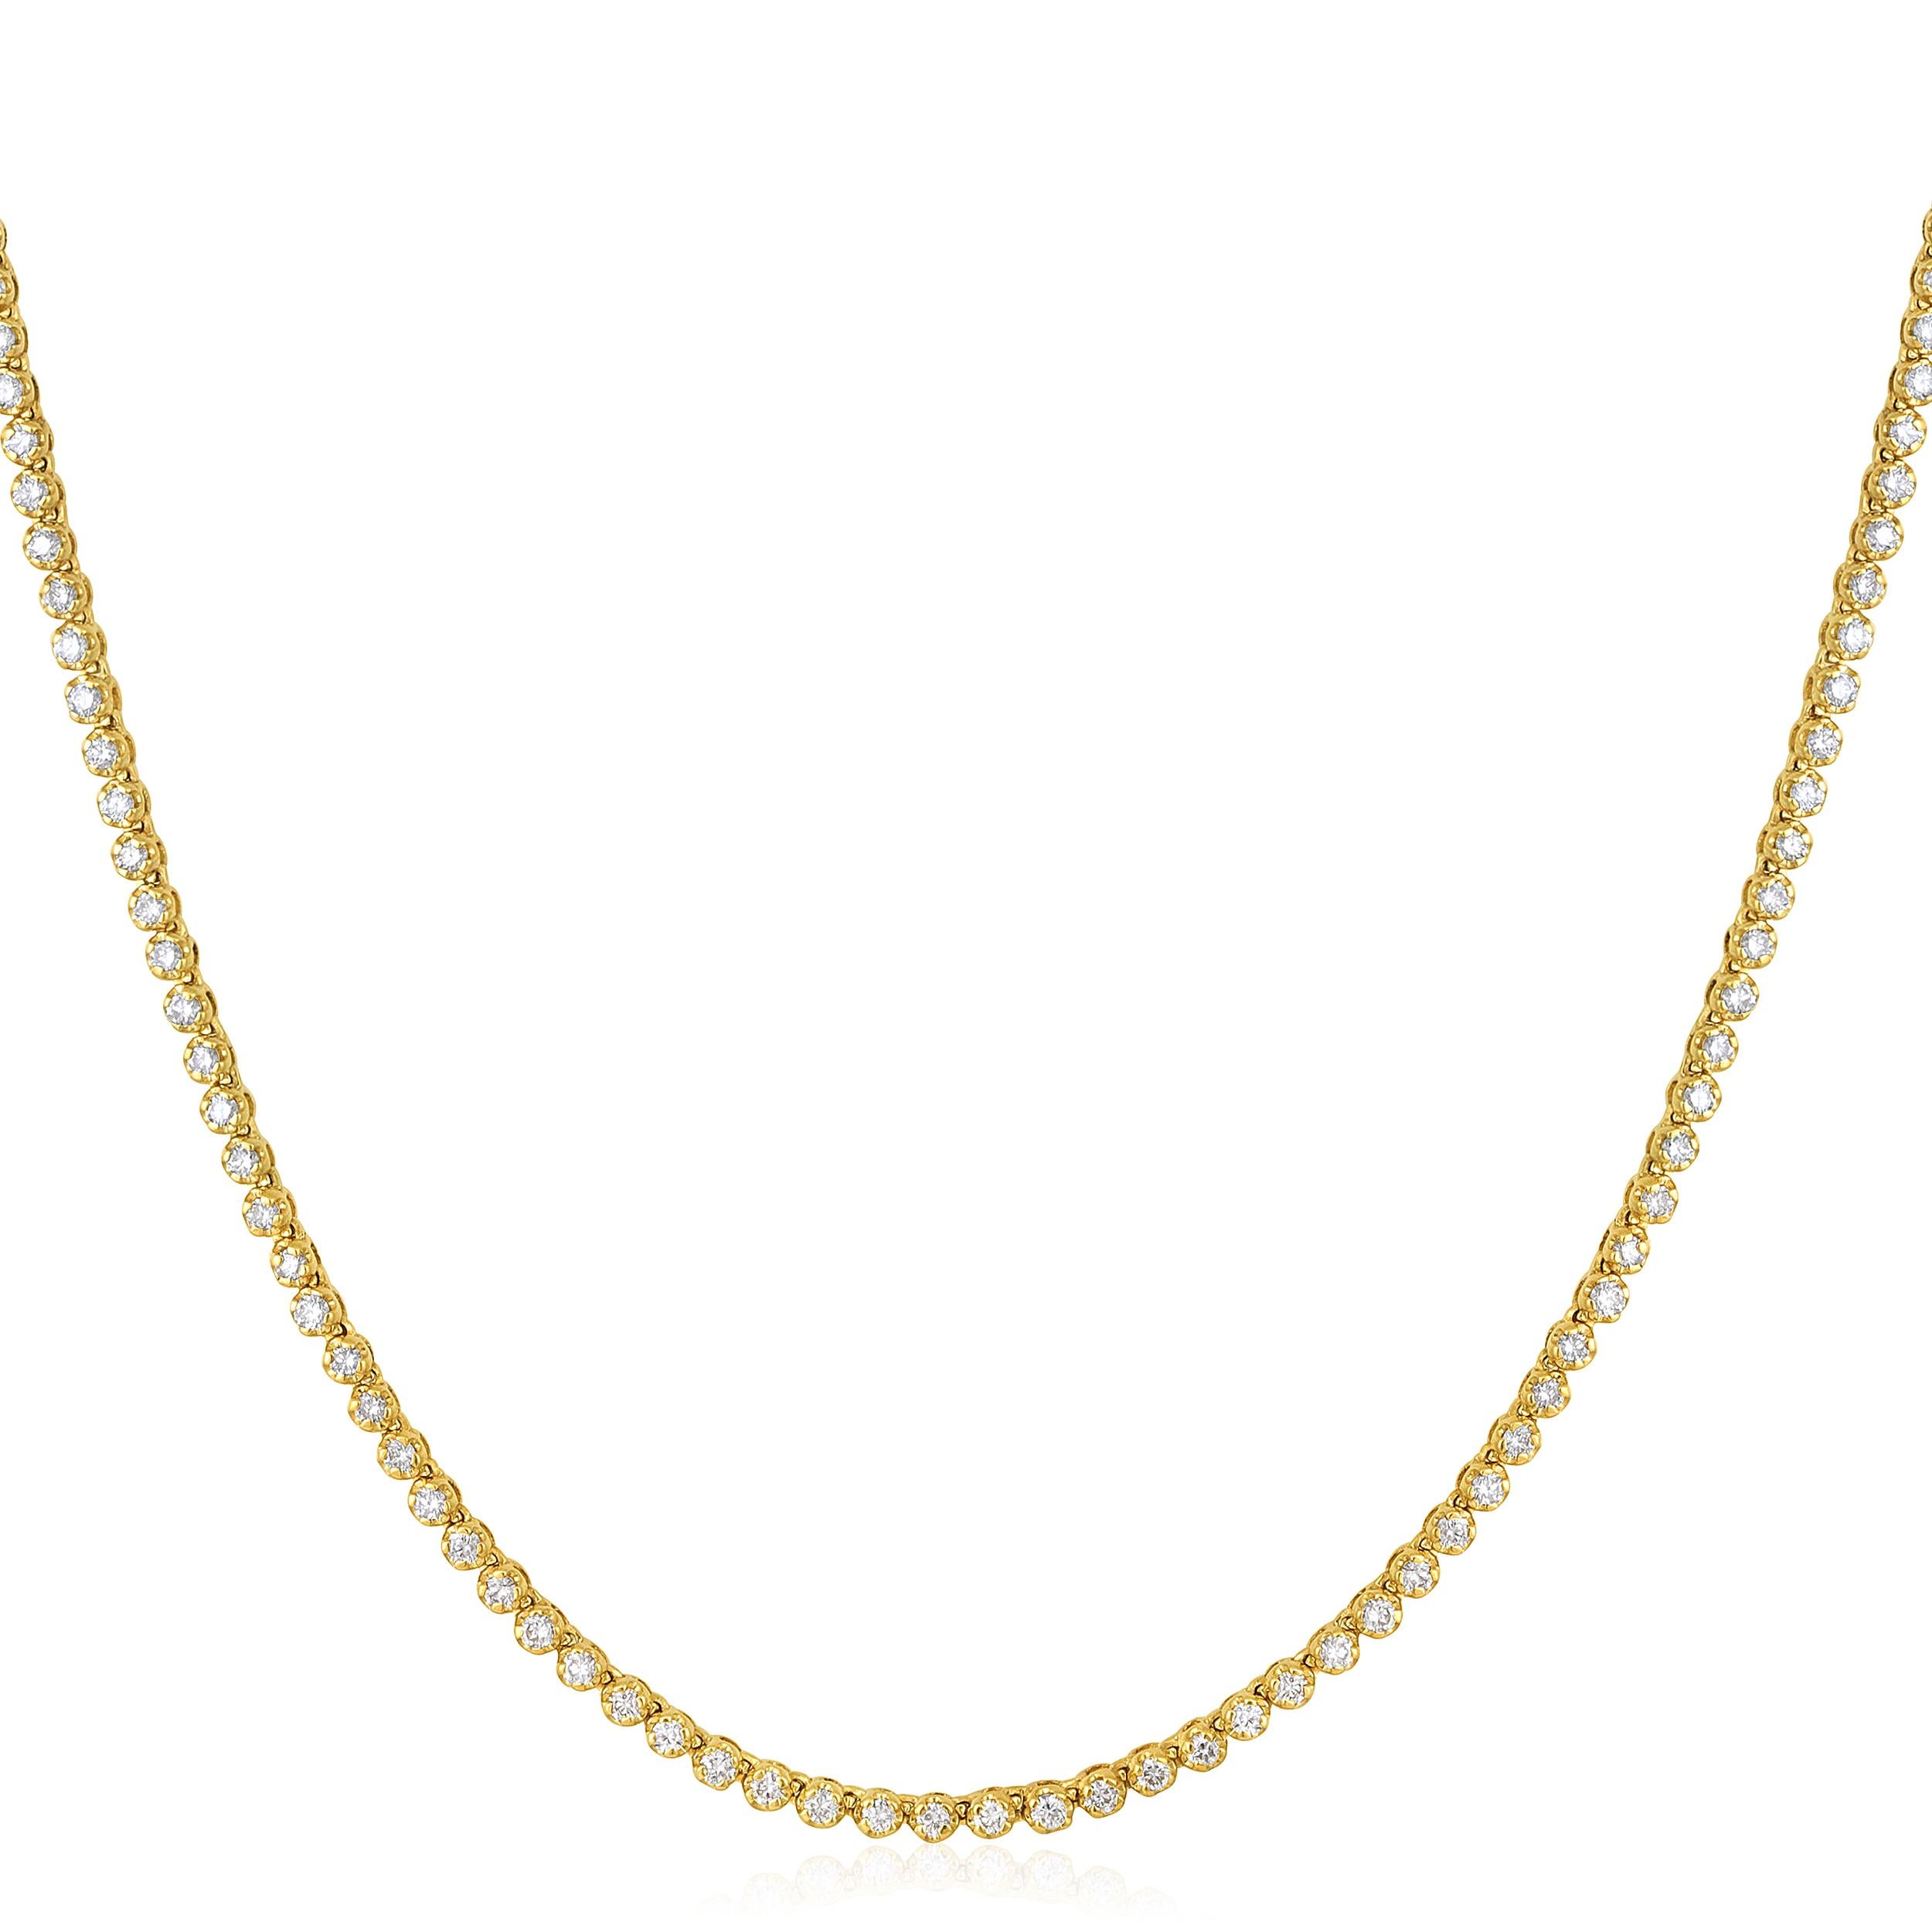 Crafted in 7.6 grams of 14K Yellow Gold, the necklace contains 170 stones of Round Natural Diamonds with a total of 1.78 carat in G-H color and SI clarity. The necklace length is 18 inches.

CONTEMPORARY AND TIMELESS ESSENCE: Crafted in